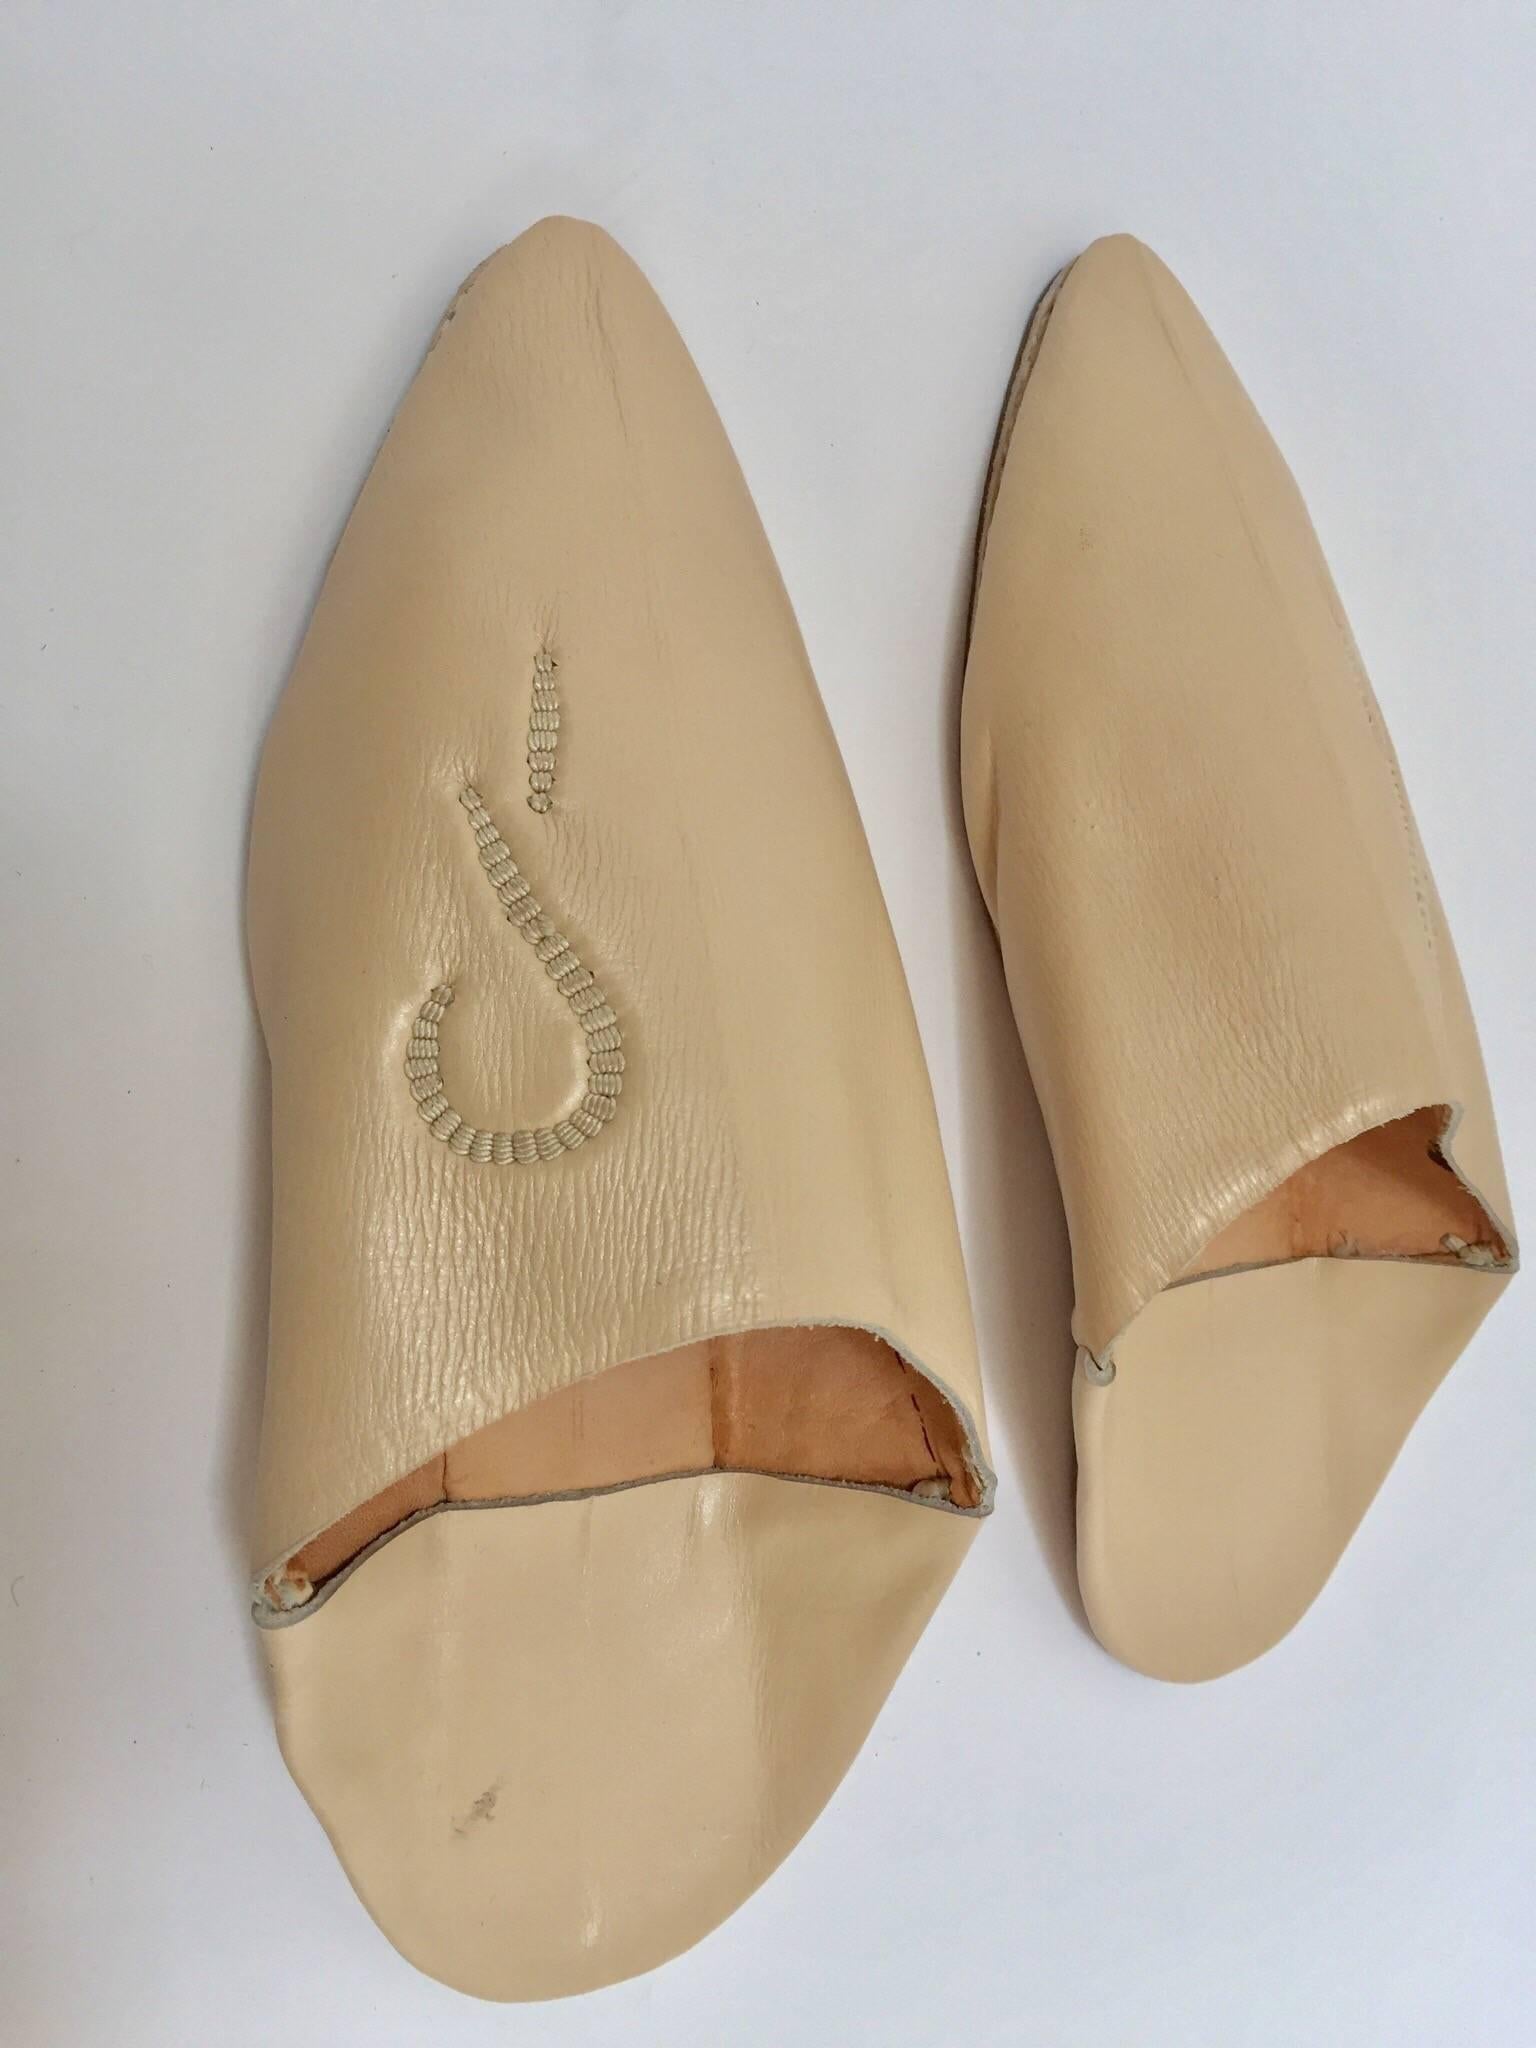 Moroccan Hand Tooled Leather Slippers Pointed Shoes In Good Condition For Sale In North Hollywood, CA